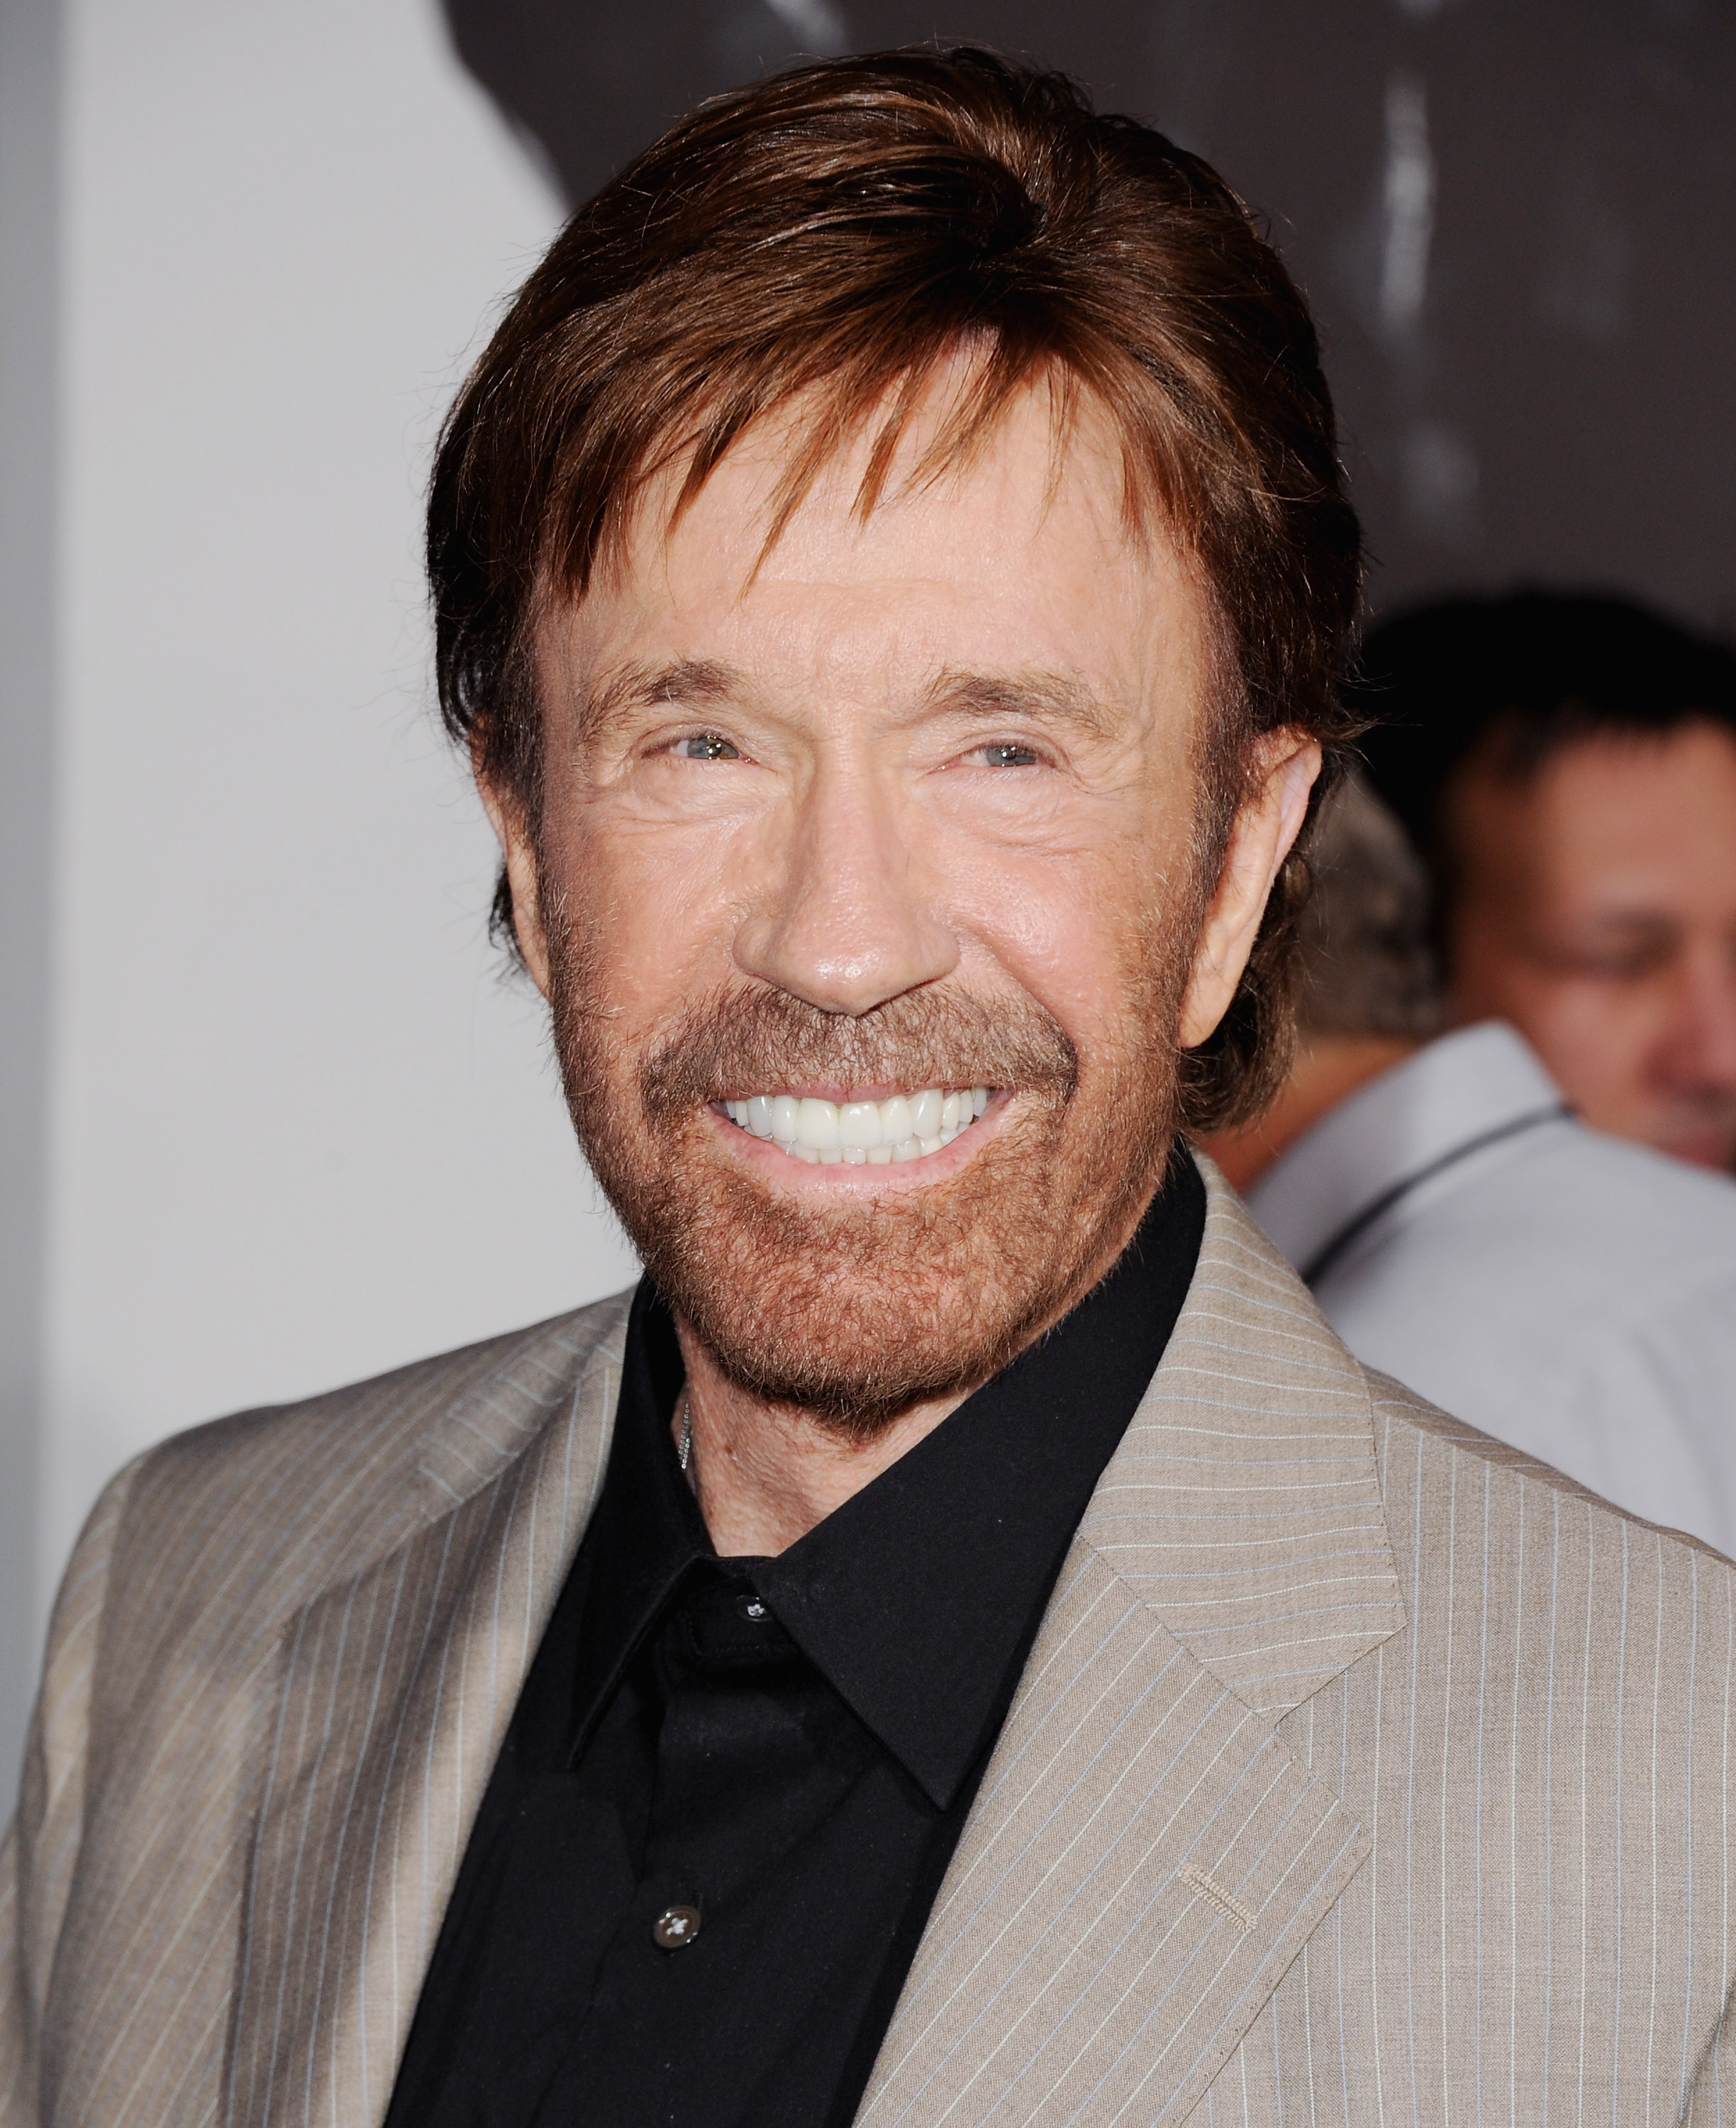 Chuck Norris arrives at the Los Angeles Premiere of "The Expendables 2" at Grauman's Chinese Theatre on August 15, 2012, in Hollywood, California. | Source: Getty Images